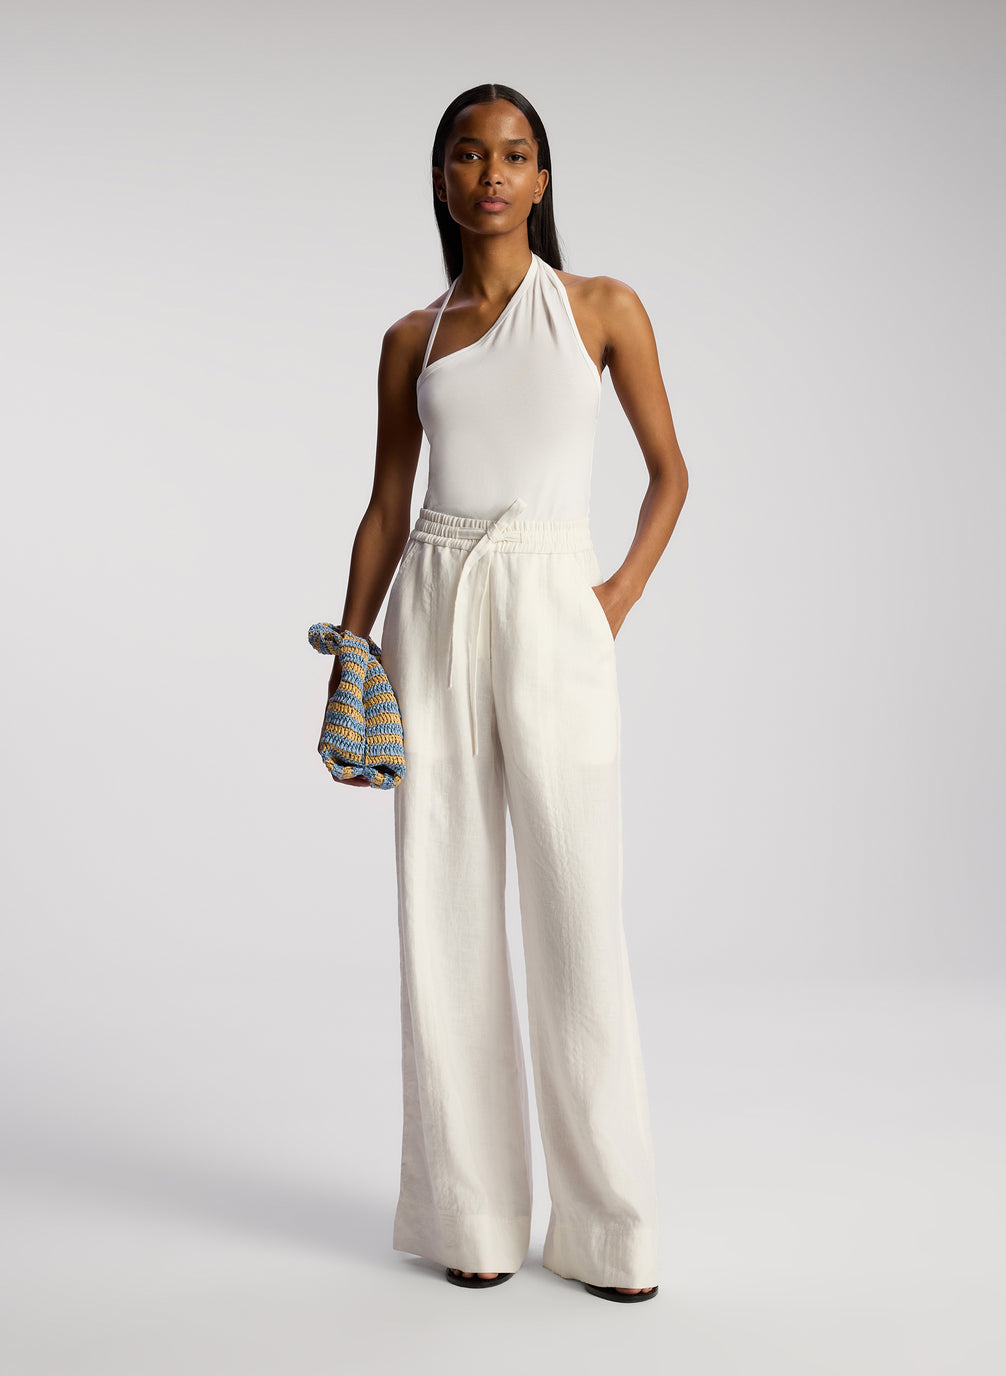 front view of woman wearing white asymmetric tank top and cream linen wide leg pants